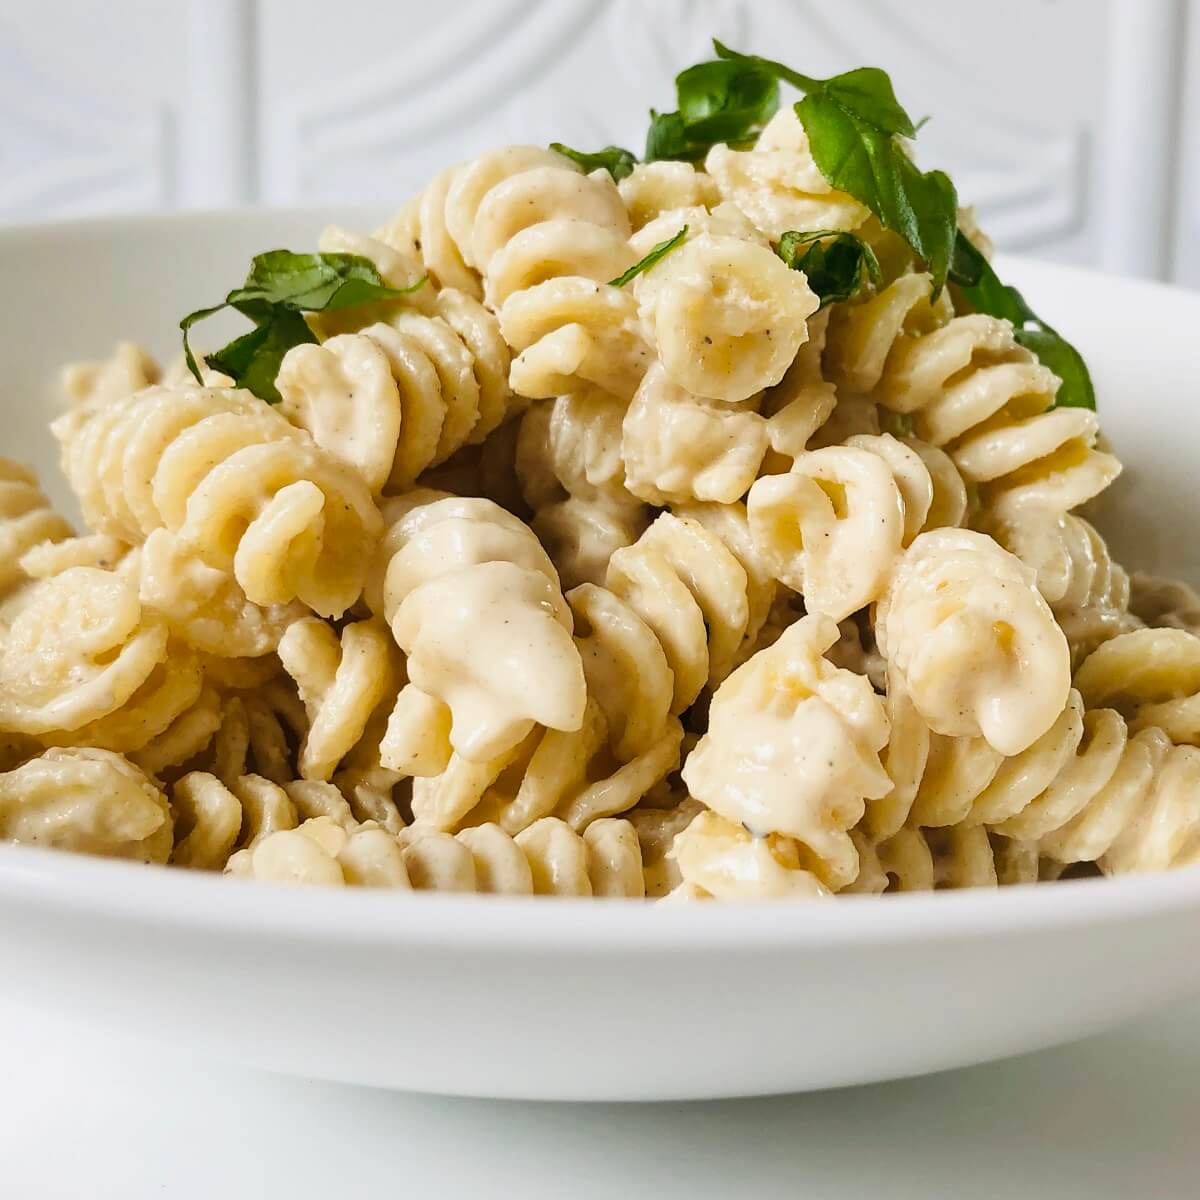 Creamy vegan pasta with fresh basil sprinkled on top in a white bowl.